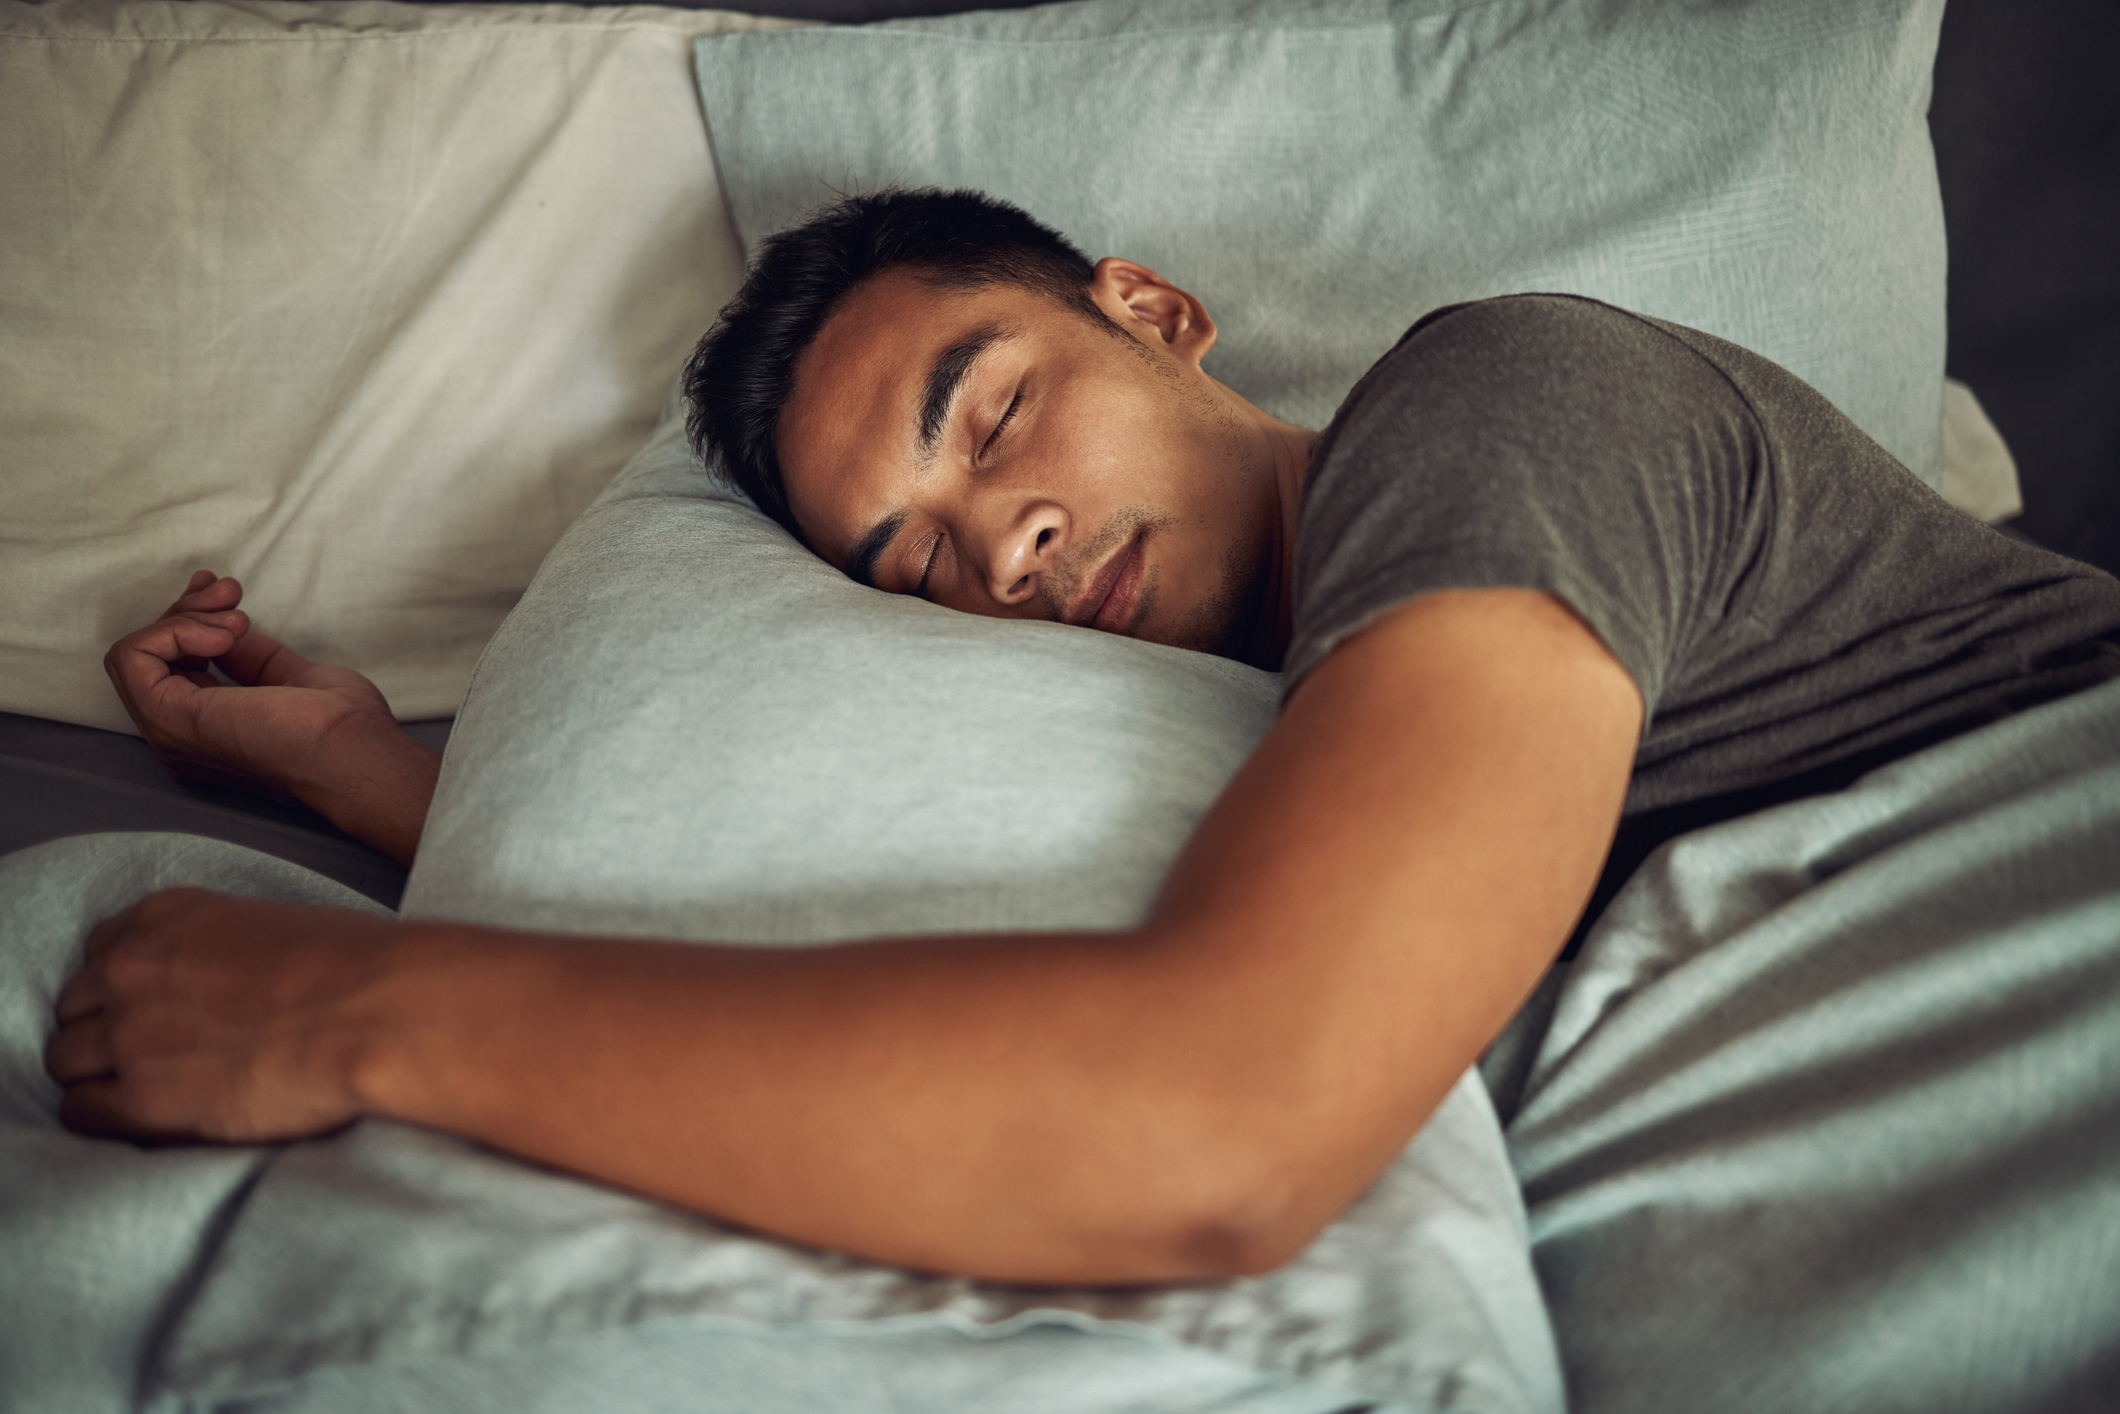 Man resting with eyes closed, hugging a pillow on a bed